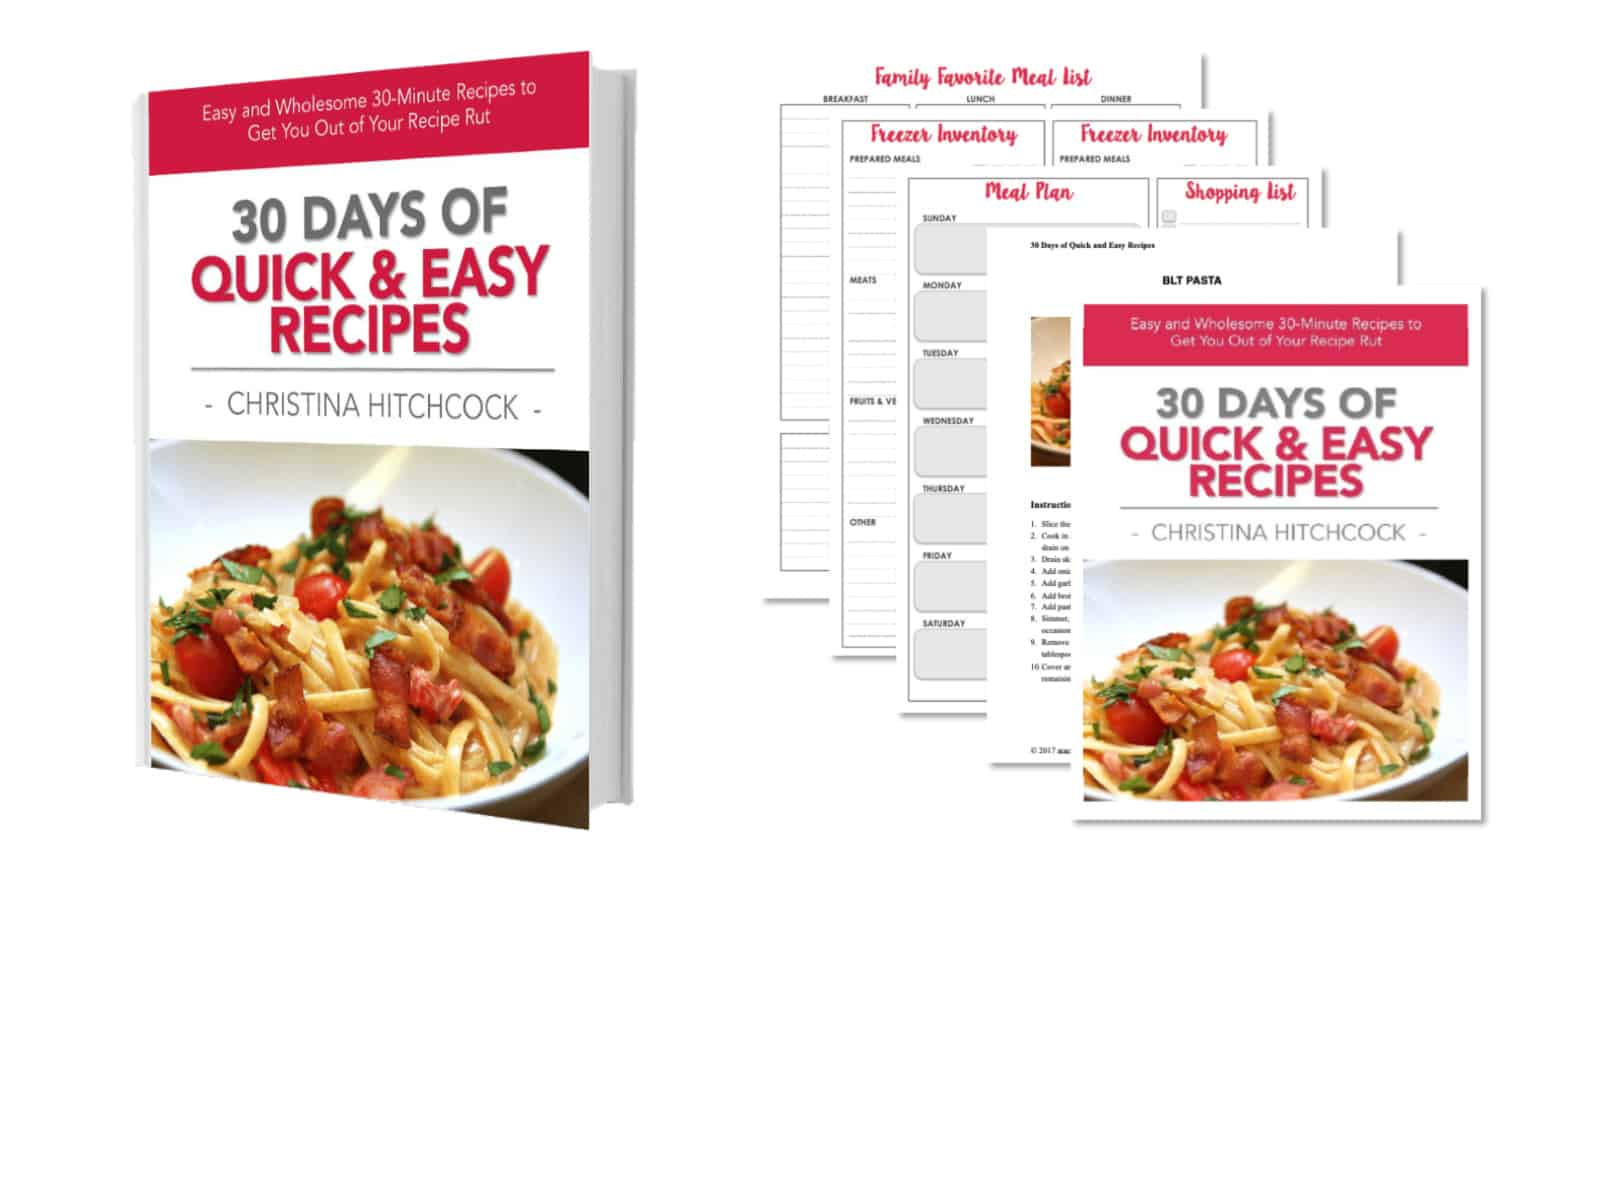 A sample of 30 Days of Quick and Easy Recipe